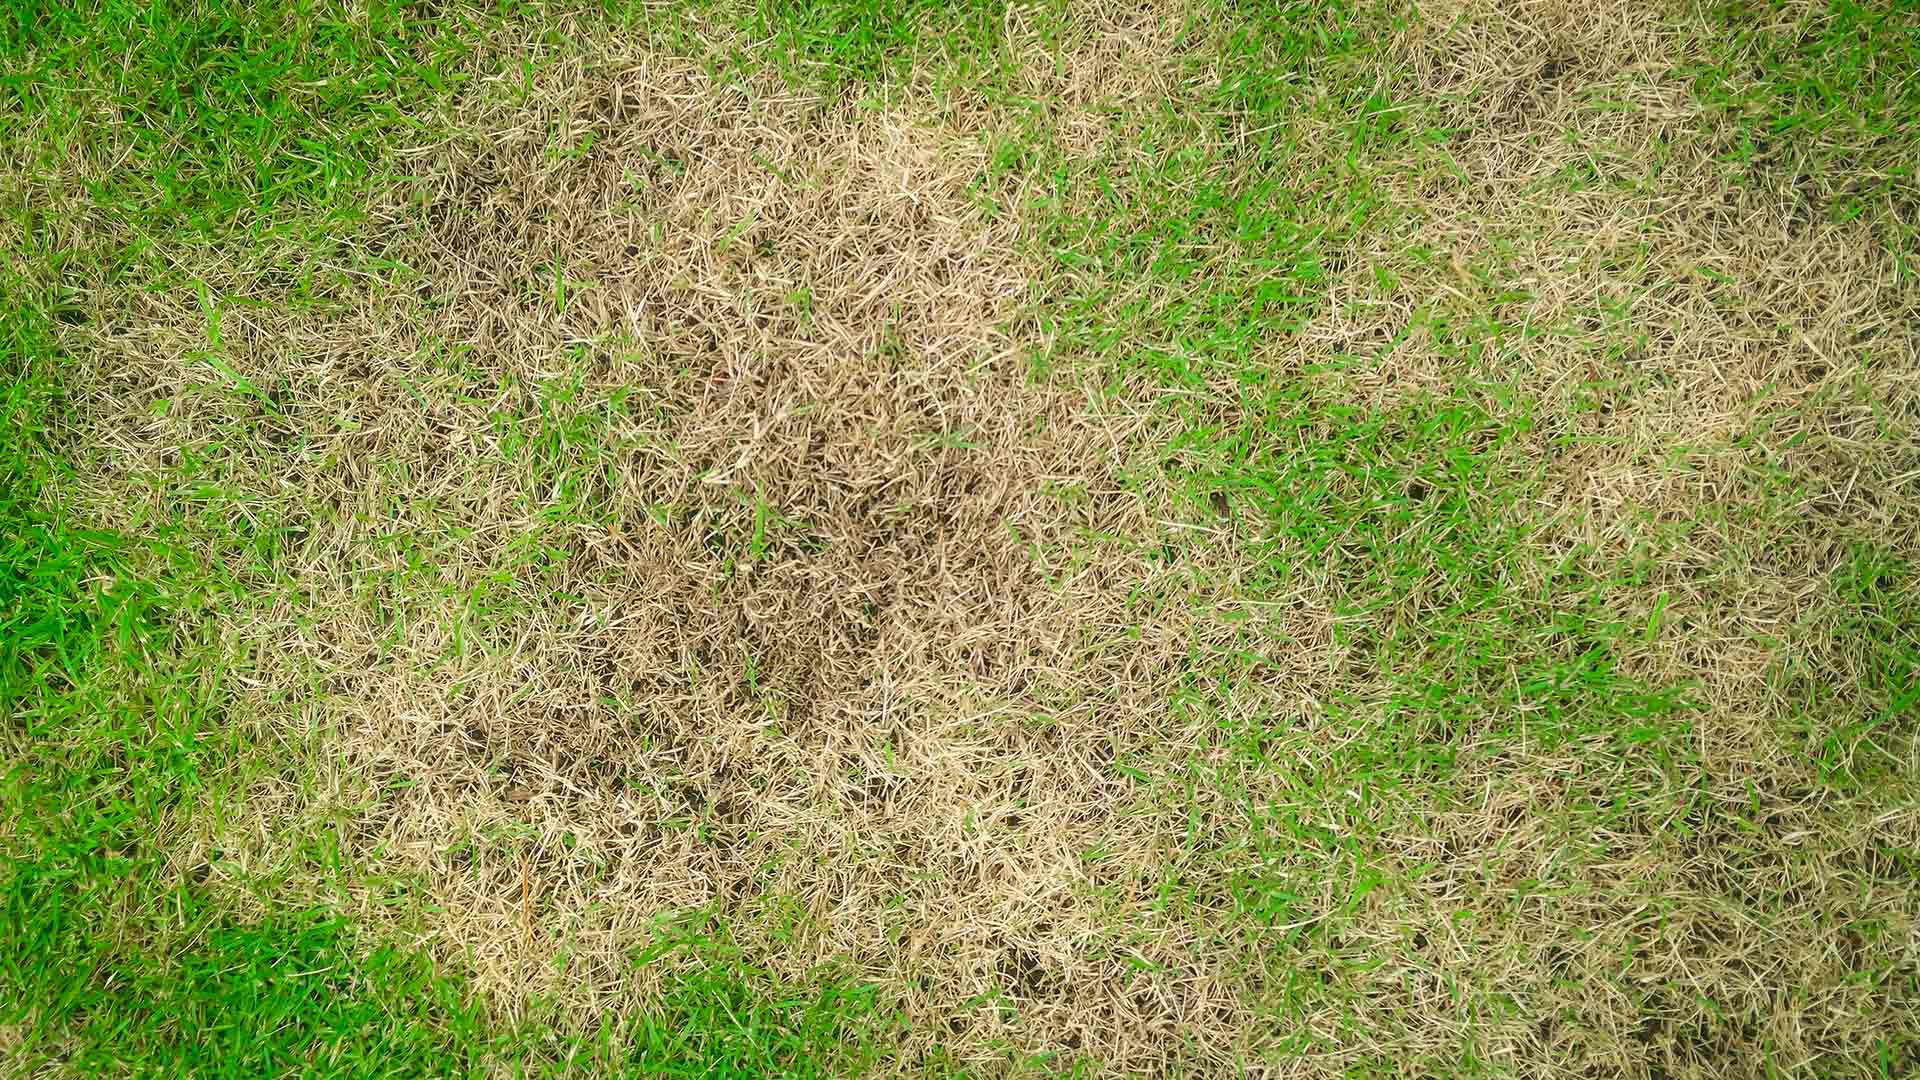 Brown Patch Lawn Disease 101 - Everything You Need to Know